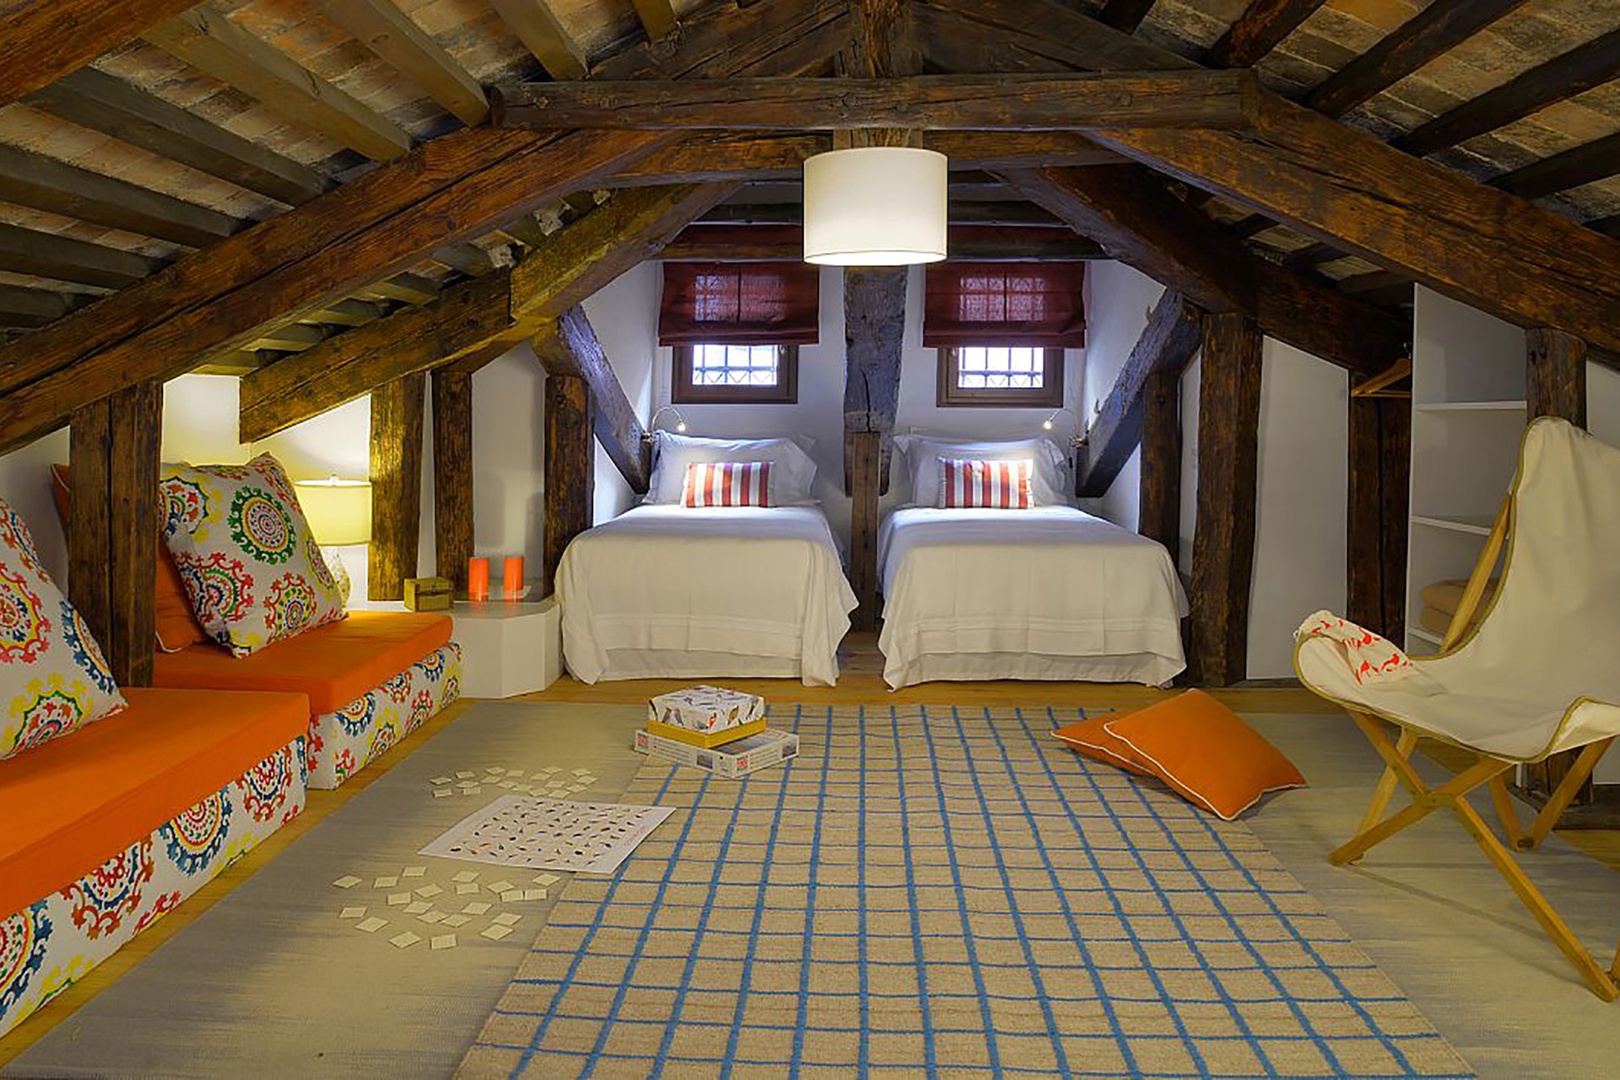 Attic bedroom. Bright highlights will appeal to children who can best navigate the low ceiling.